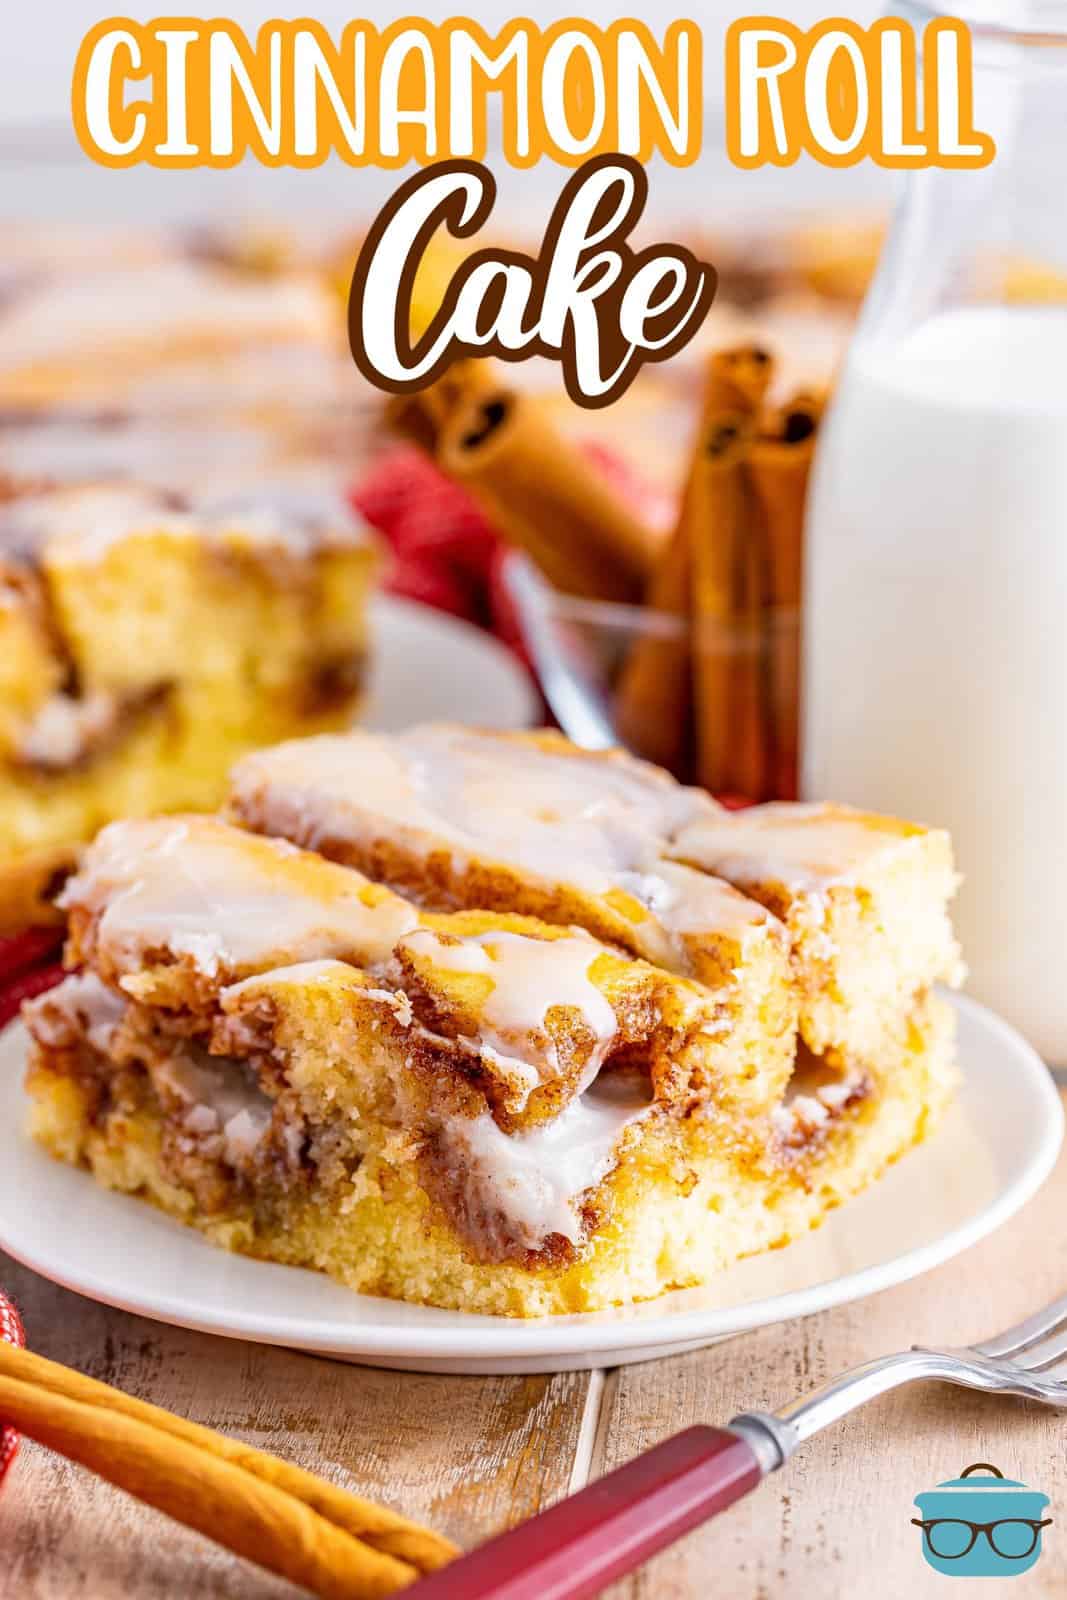 a slice of cinnamon roll cake on a white plate with a small bottle of milk in the background.